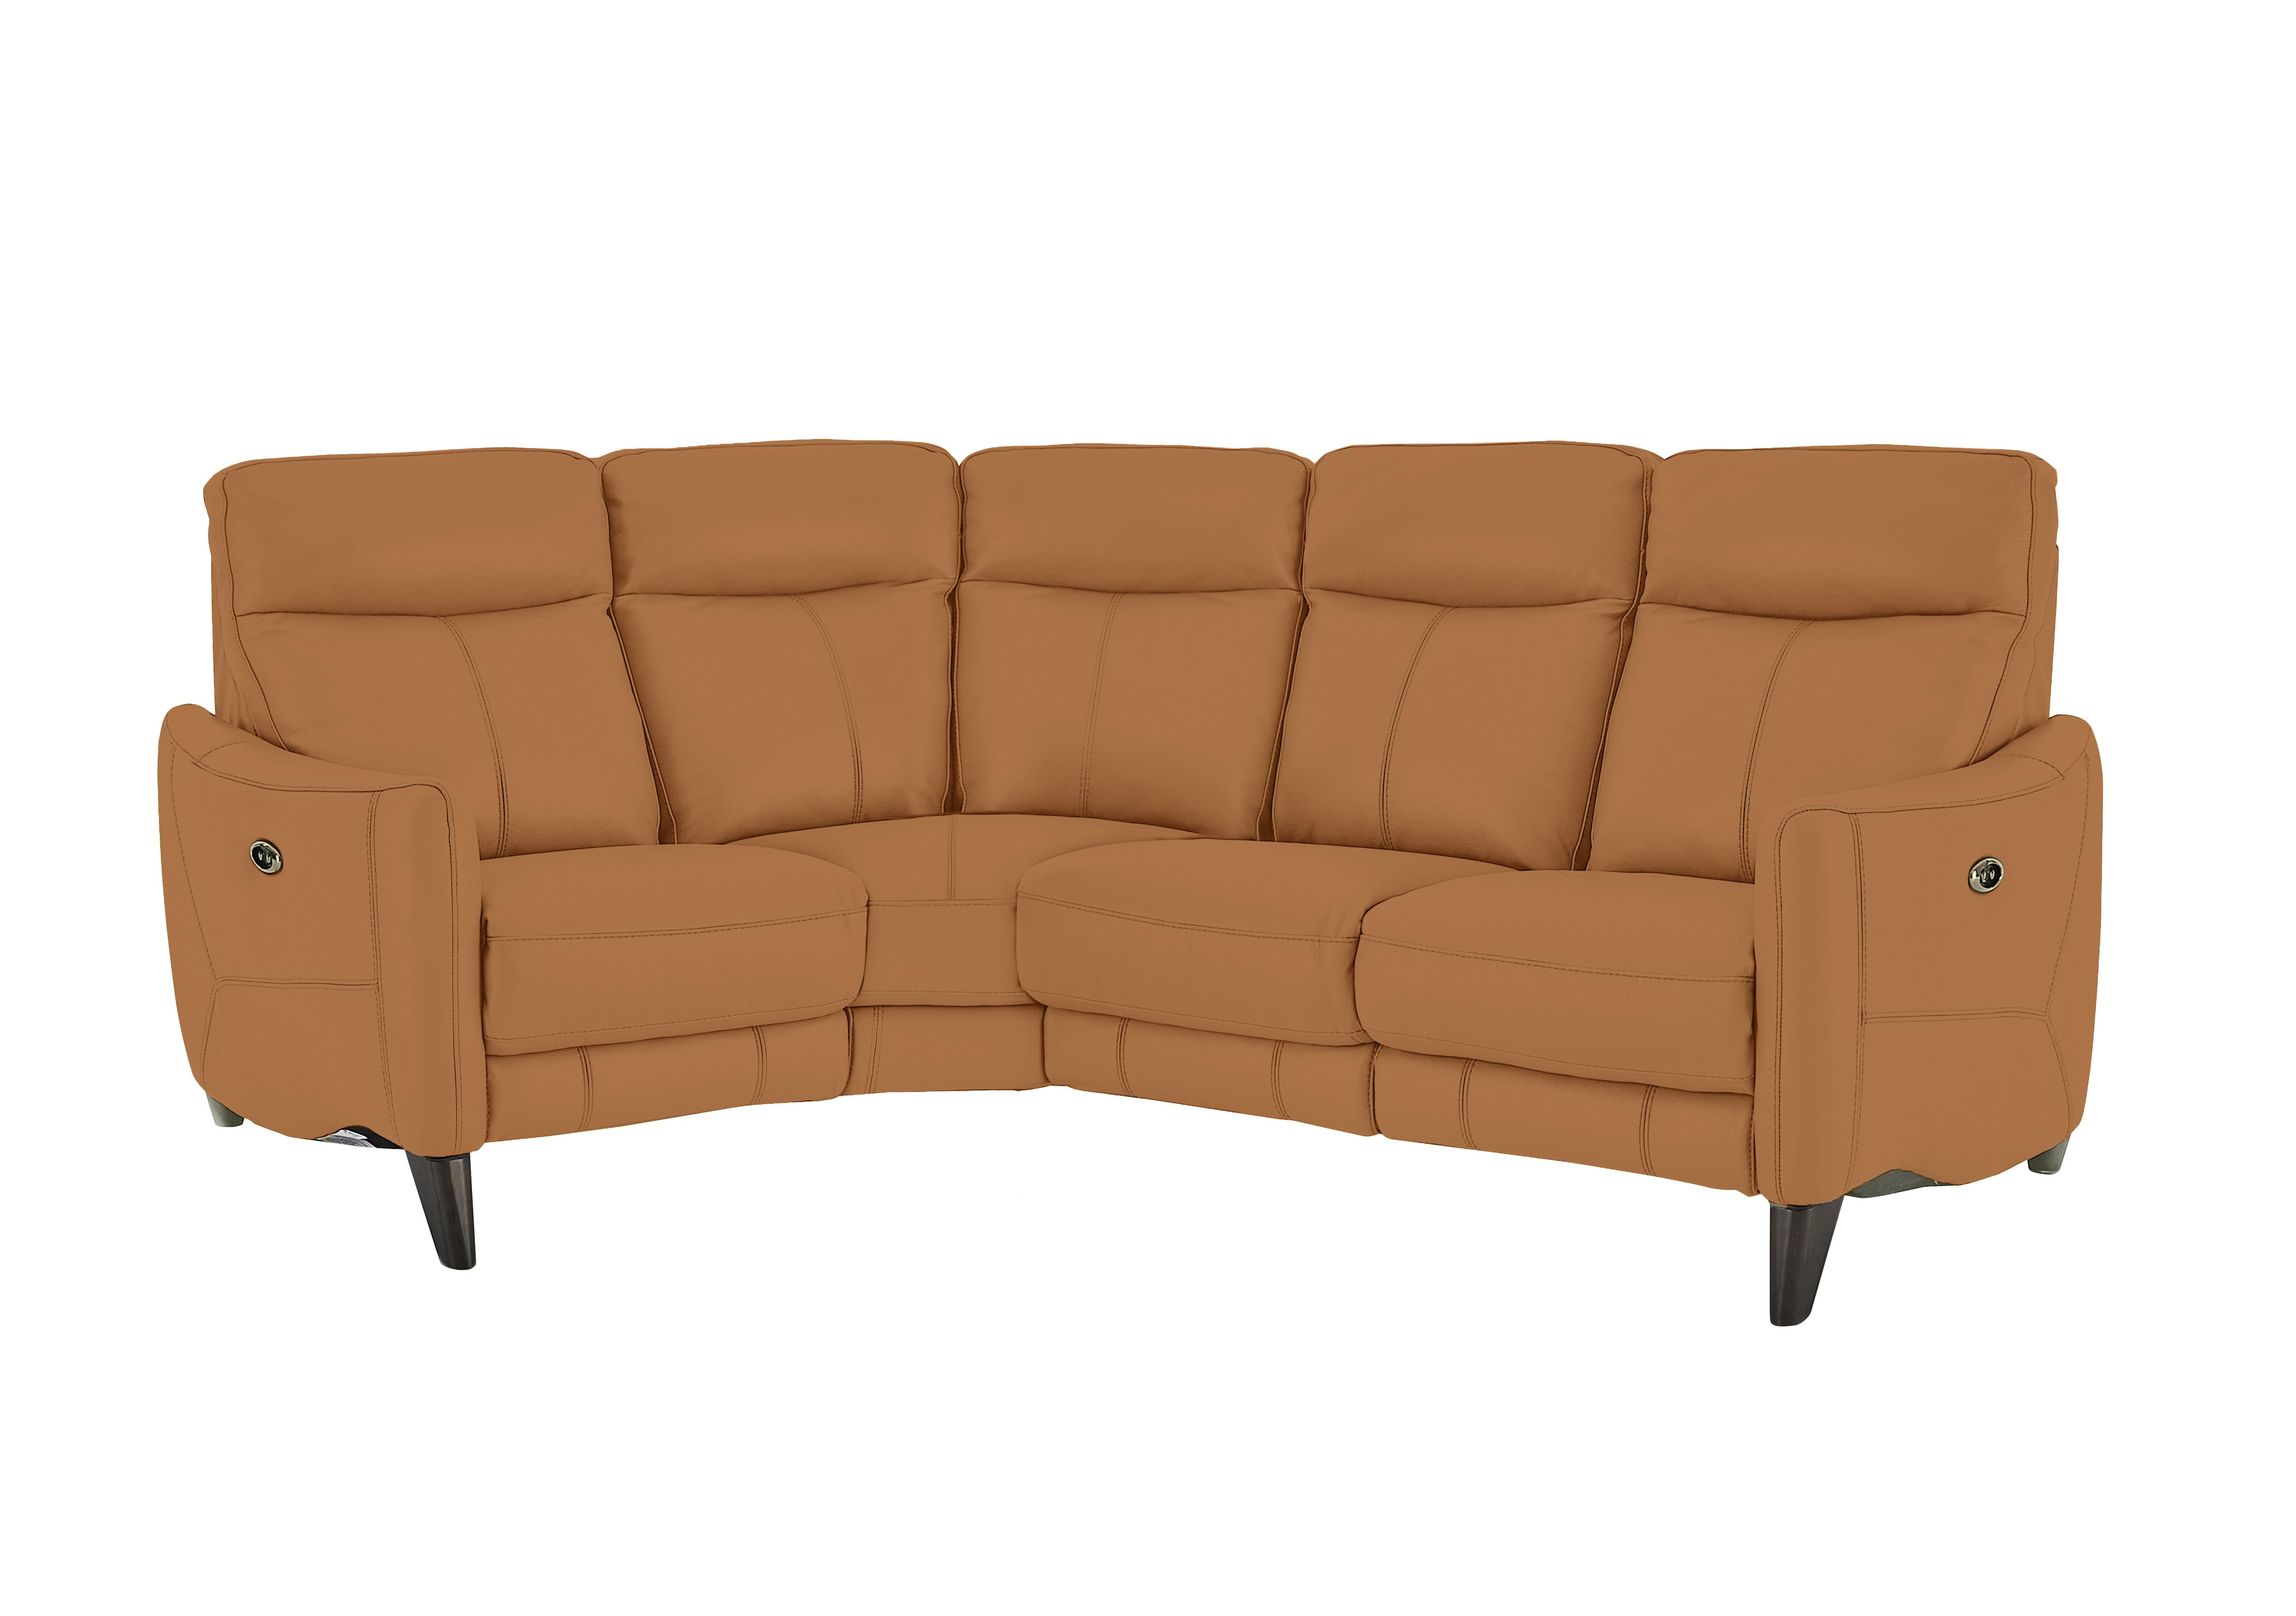 Compact Collection Petit Leather Corner Sofa in Bv-335e Honey Yellow on Furniture Village